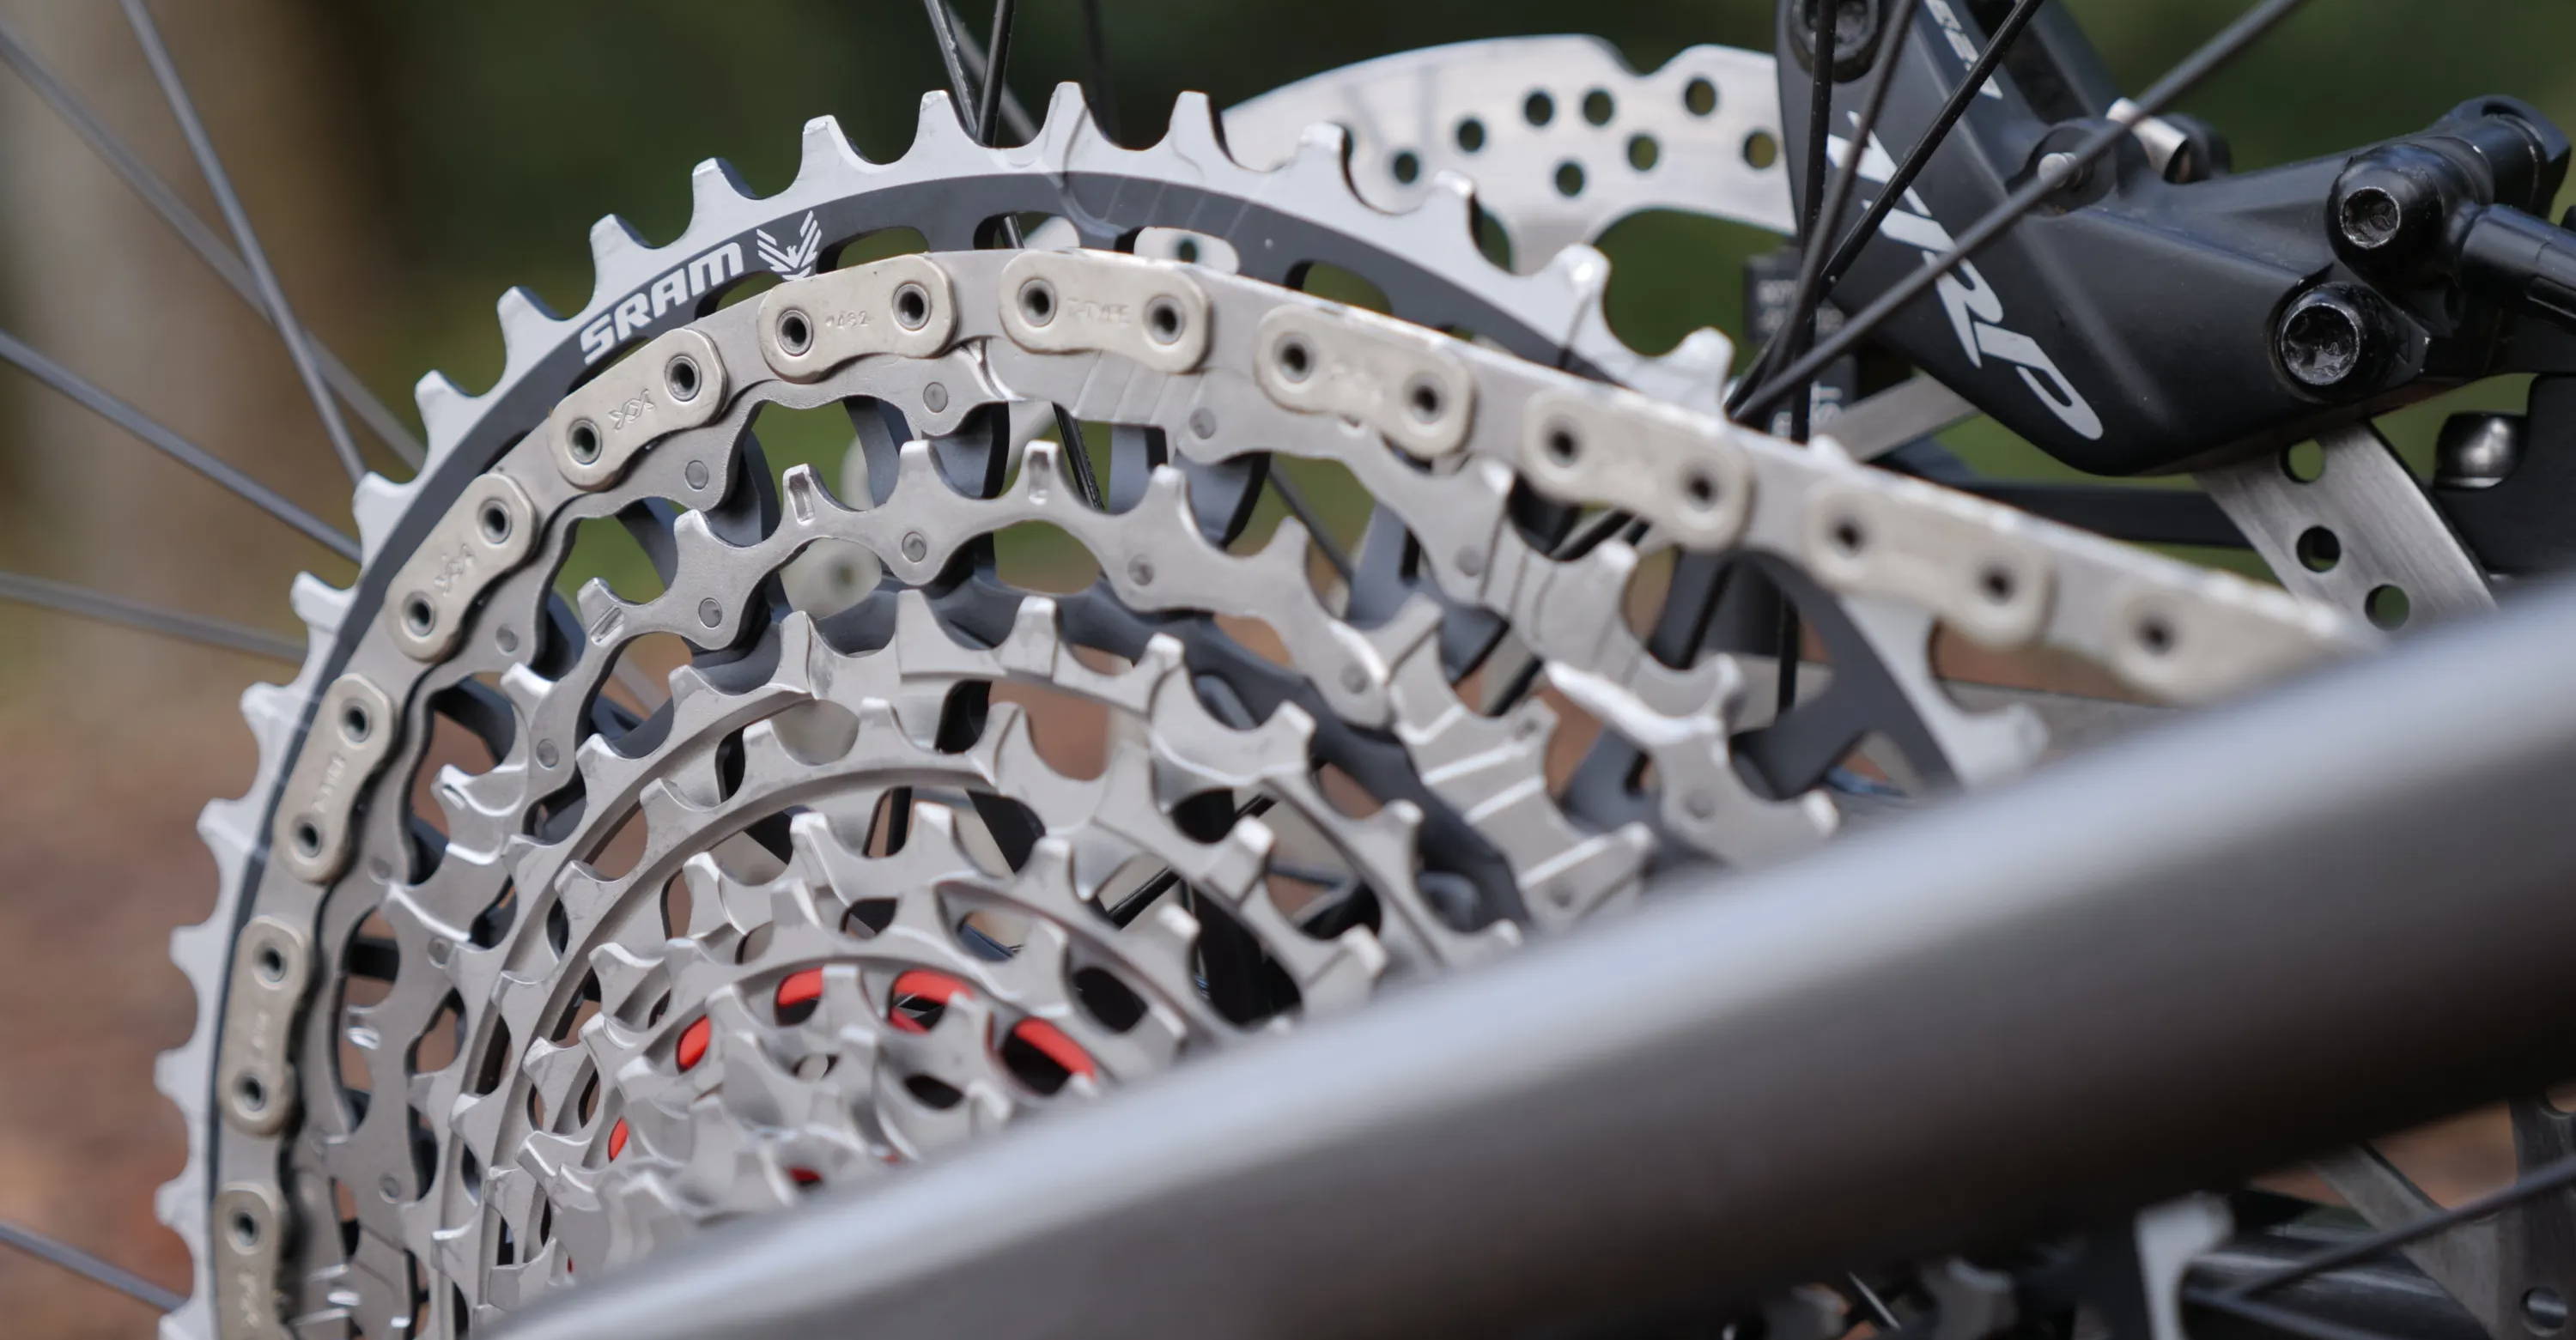 detail of the sram xx axs transmission cassette and chain on a mountain bike